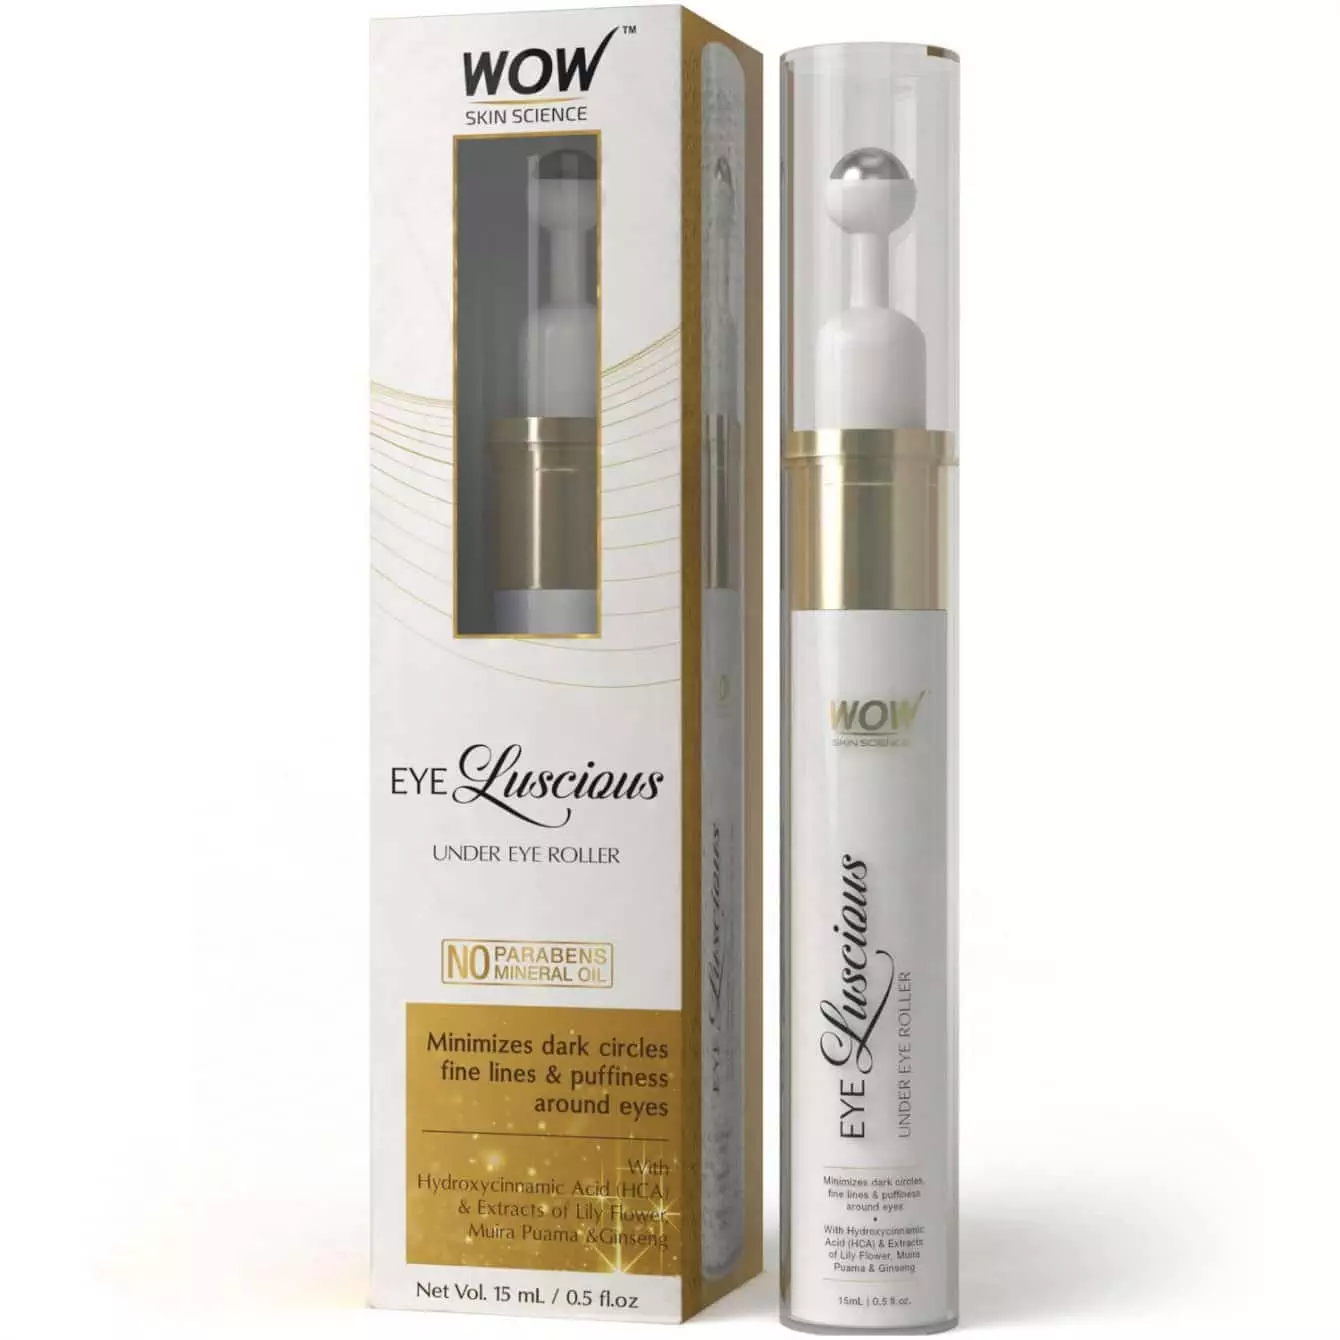 wow under eye roller review